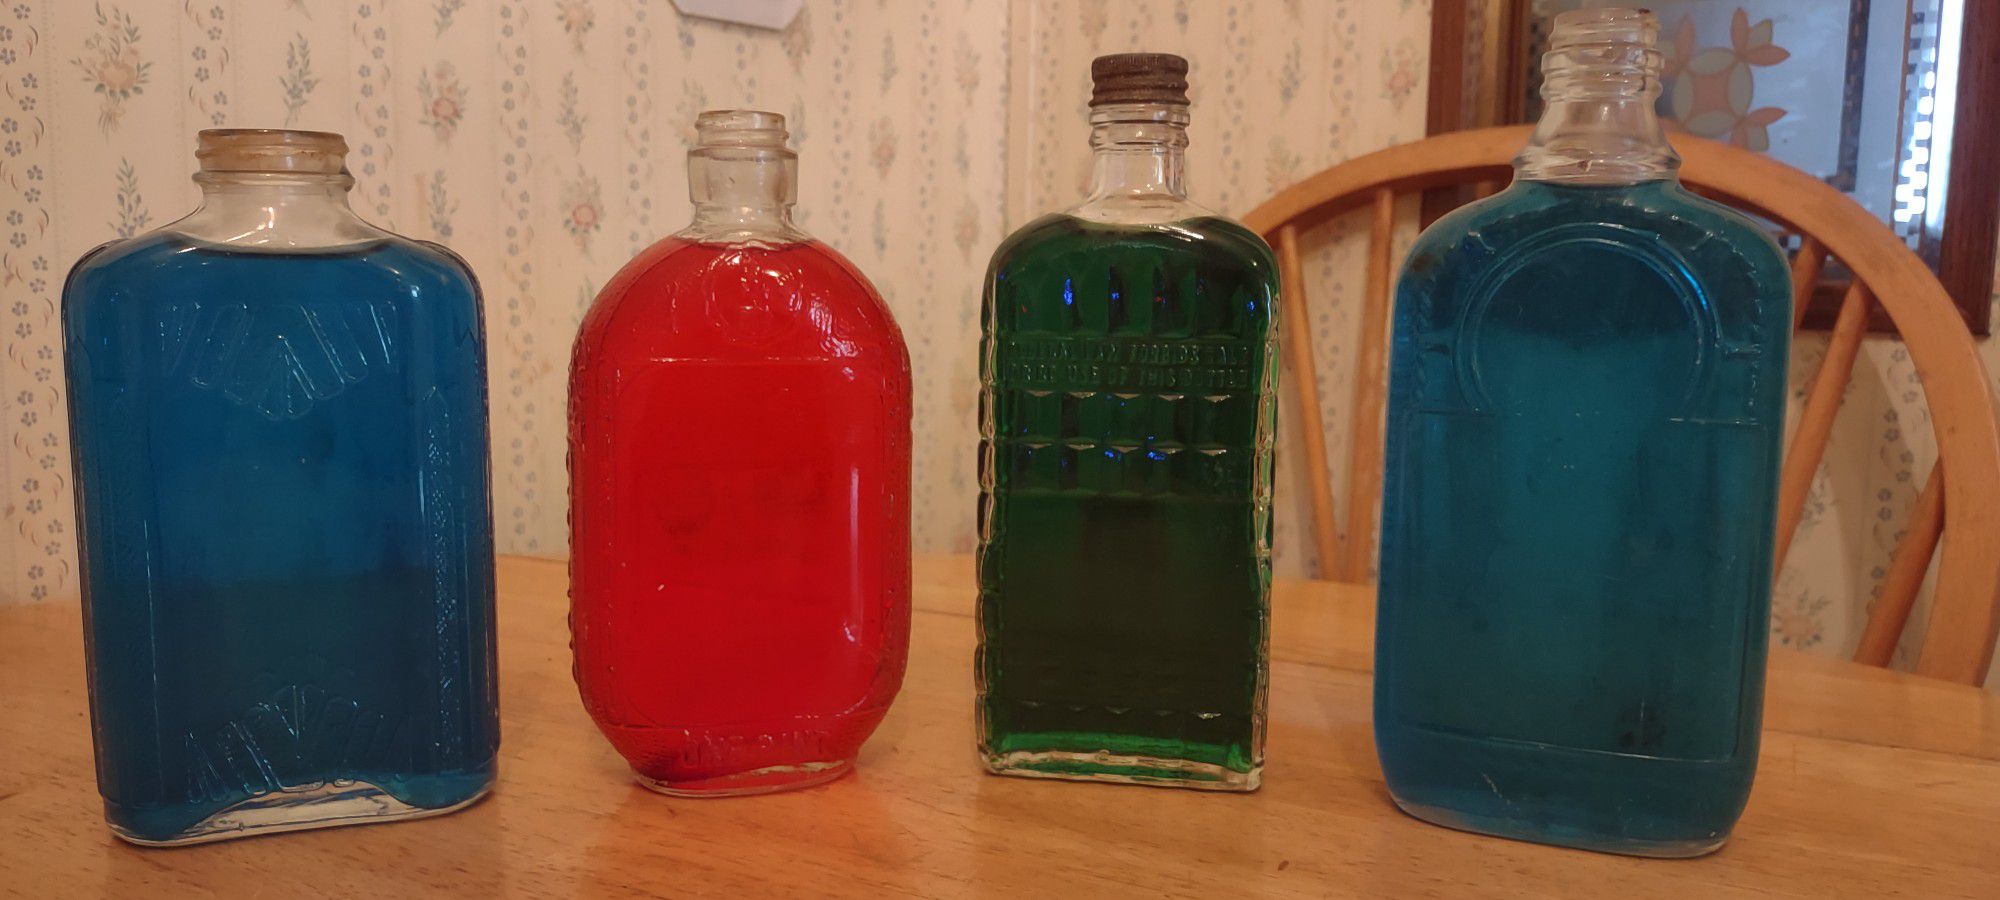 7 ANTIQUE ORNATE BOTTLES!!! COLOR ADDED TO WATER TO SHOW DESIGNS!!! 9